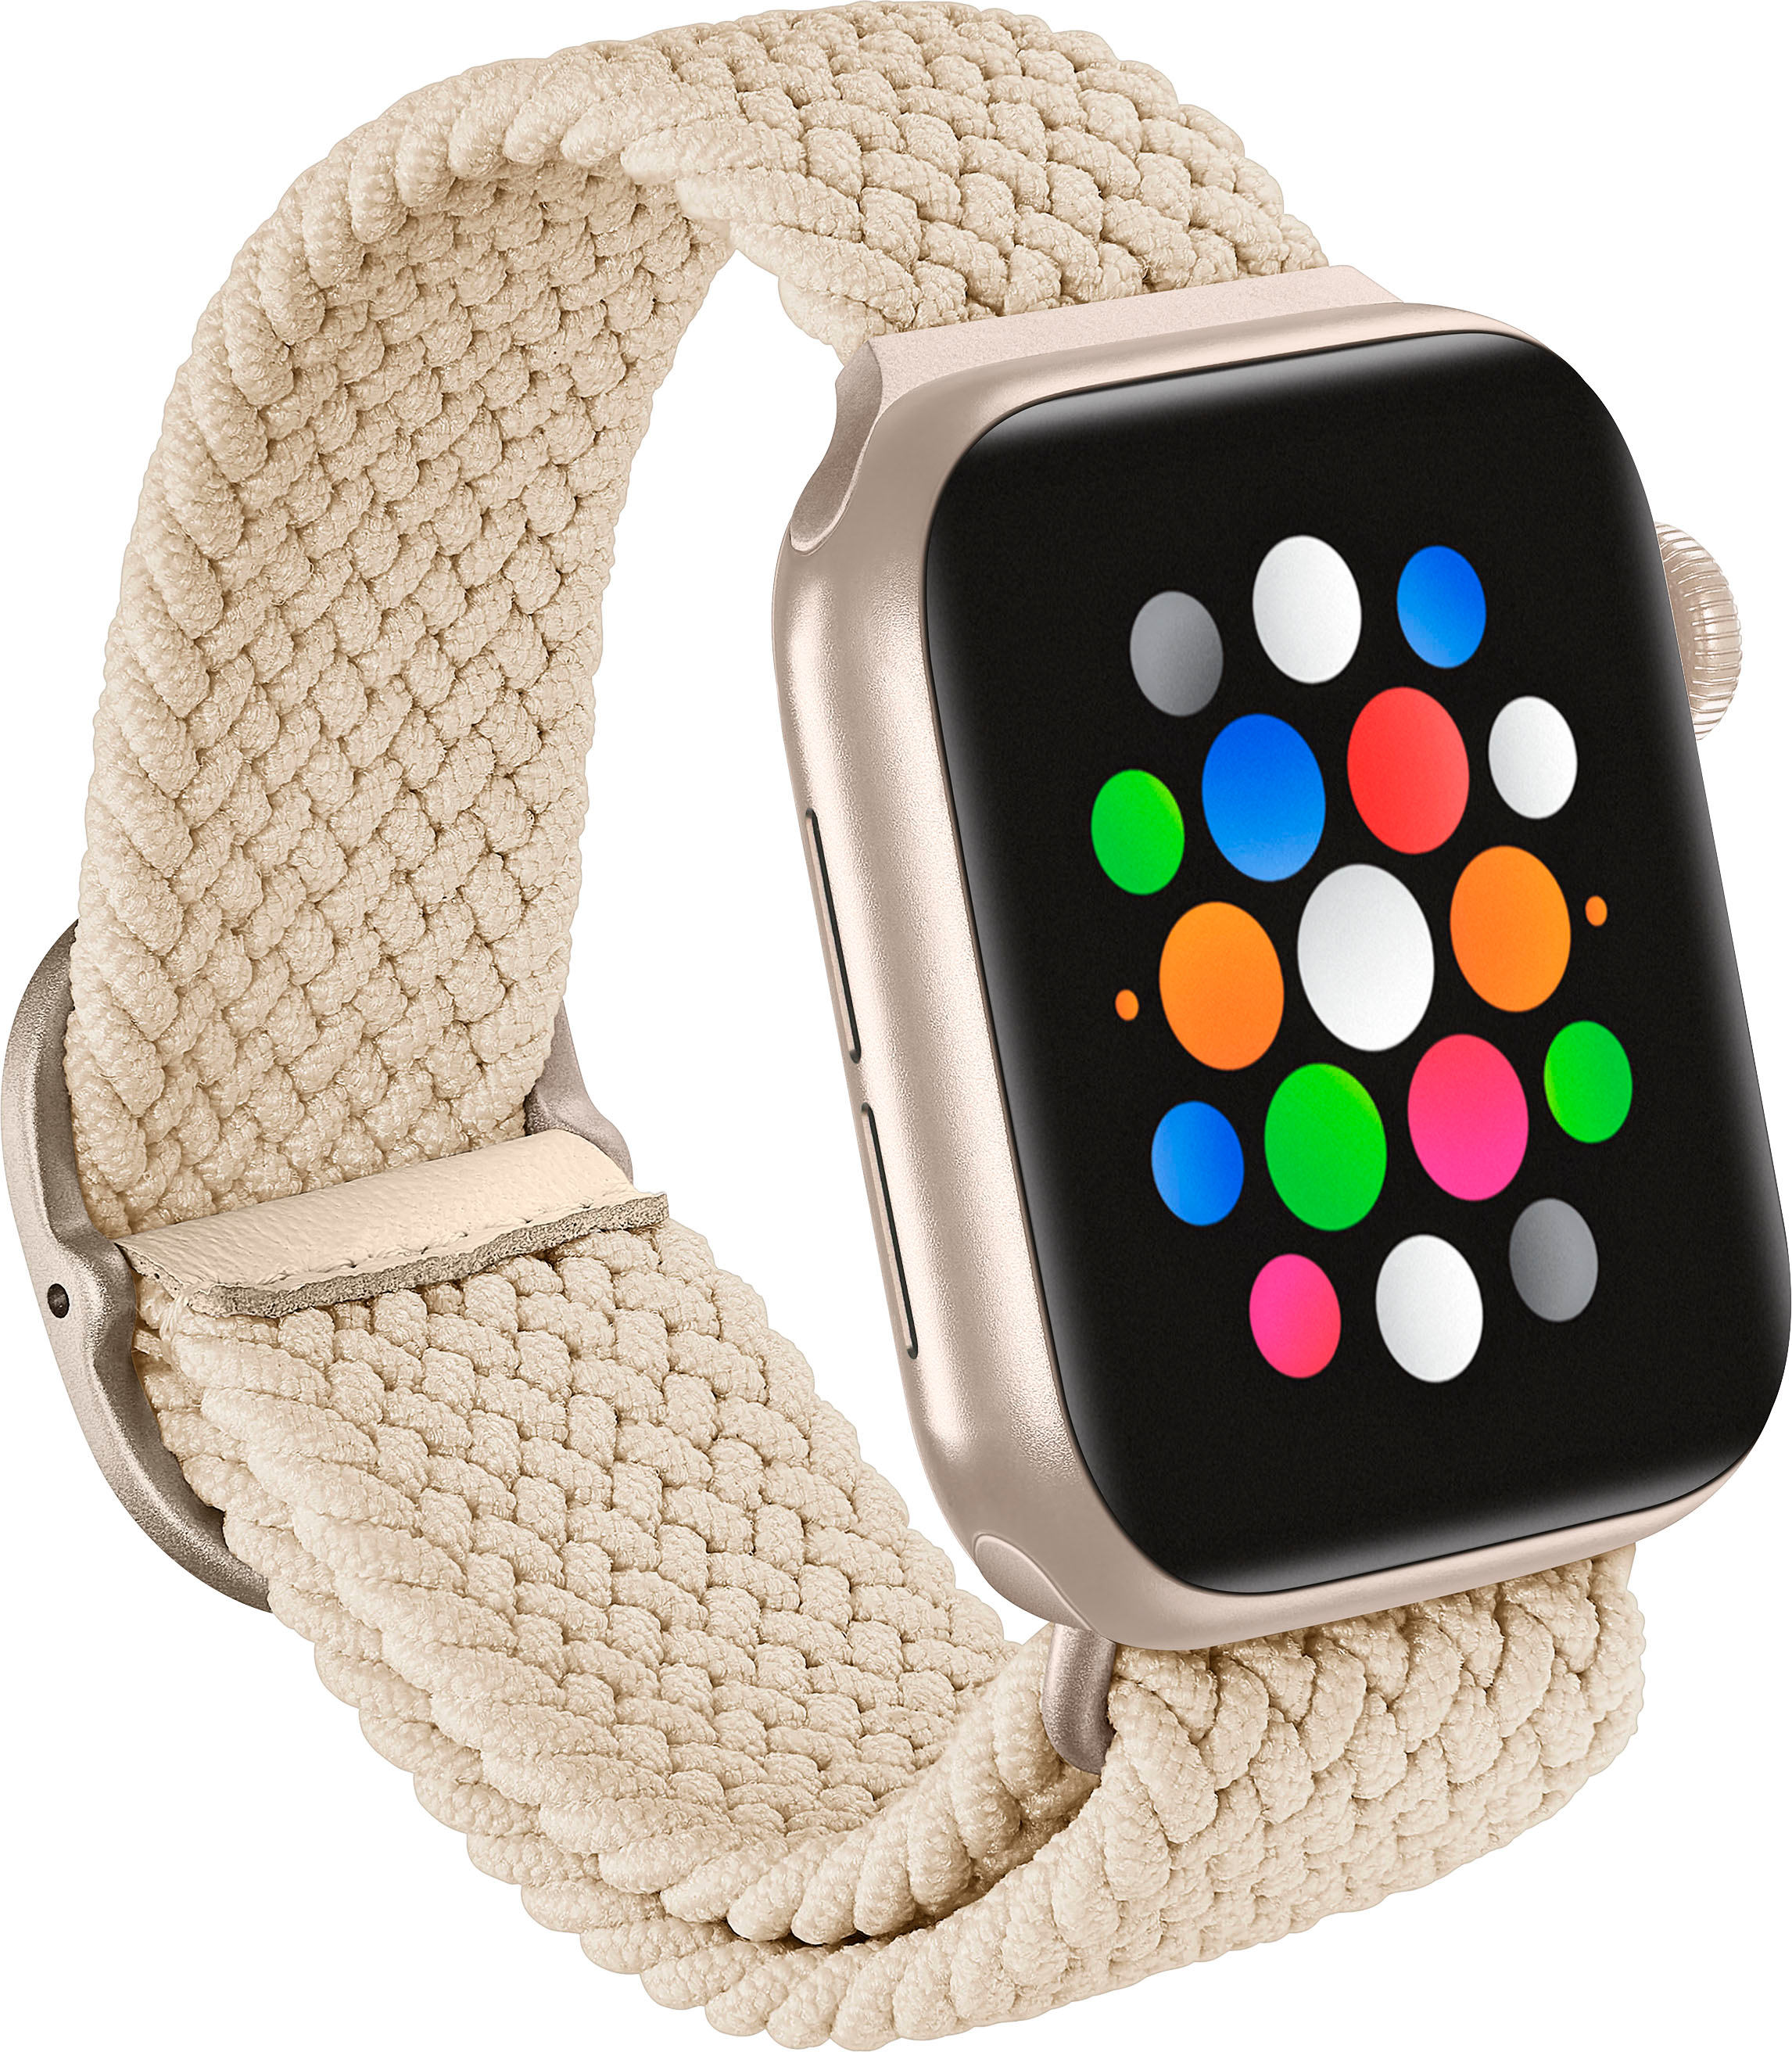 WITHit Bands for 38mm or 40mm Apple Watch, 3 Pack 